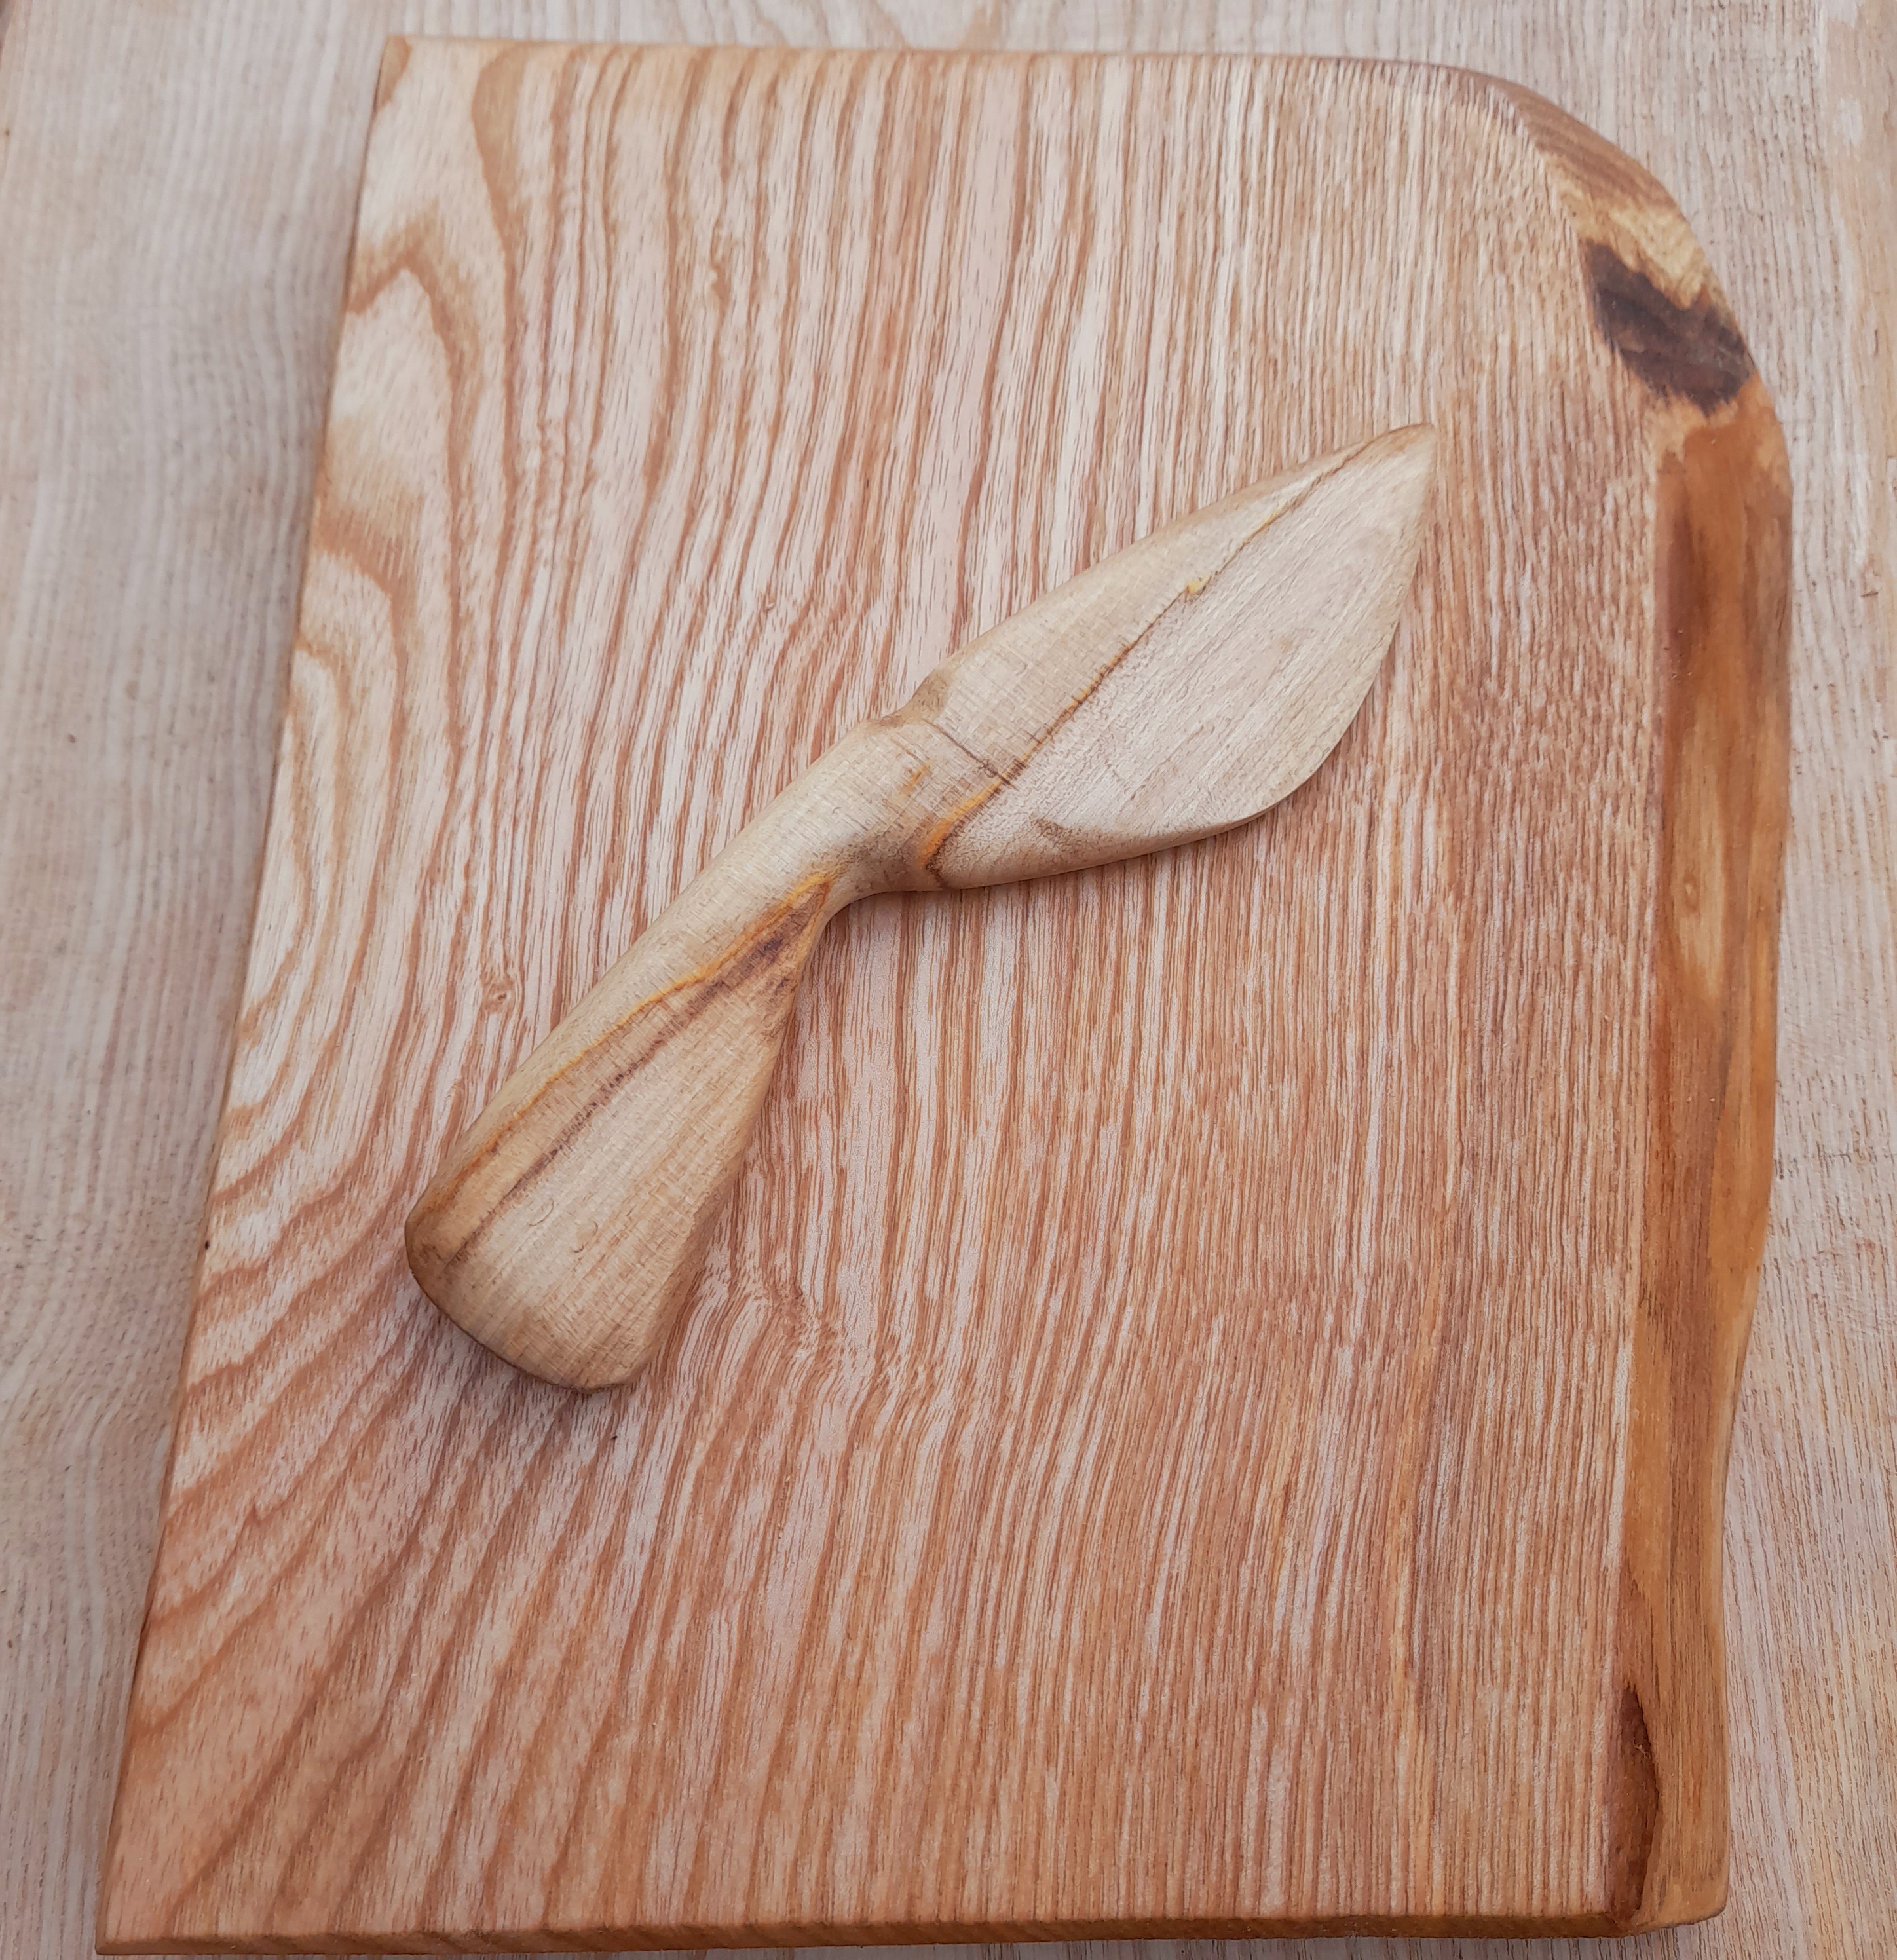 Swedish butter knife and board